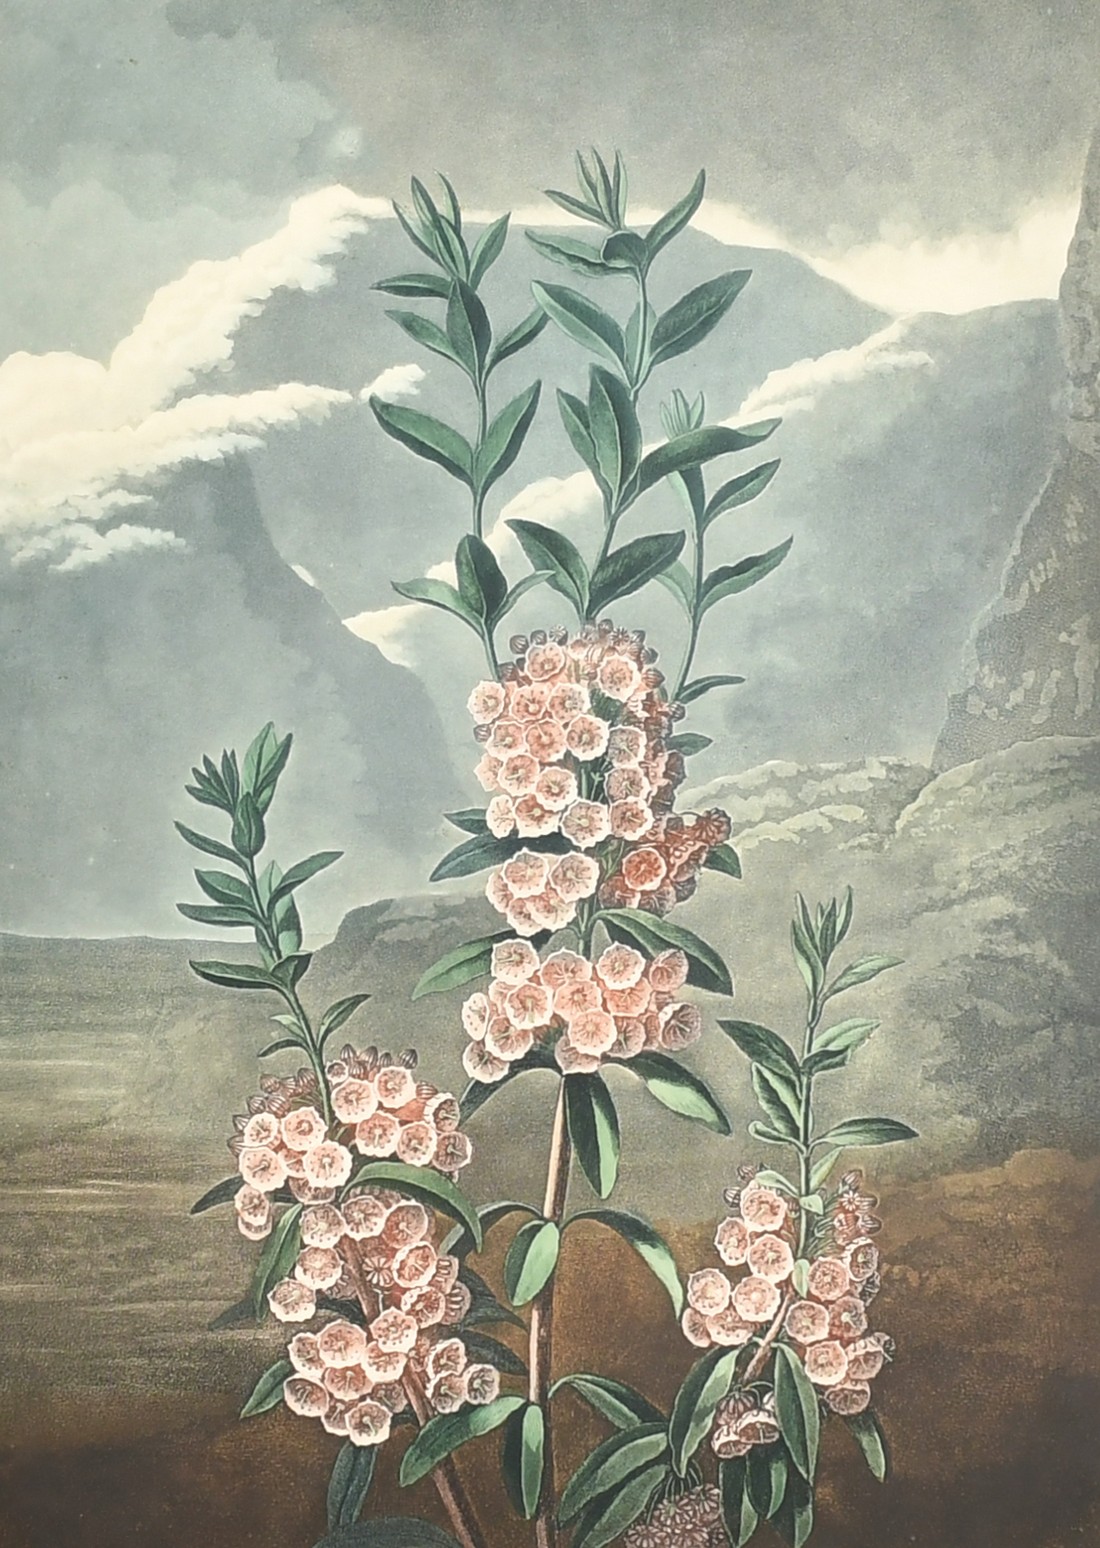 Robert John Thornton (1768-1837), from 'The Temple of Flora', after Reinagle, 'The Narrow Leaved